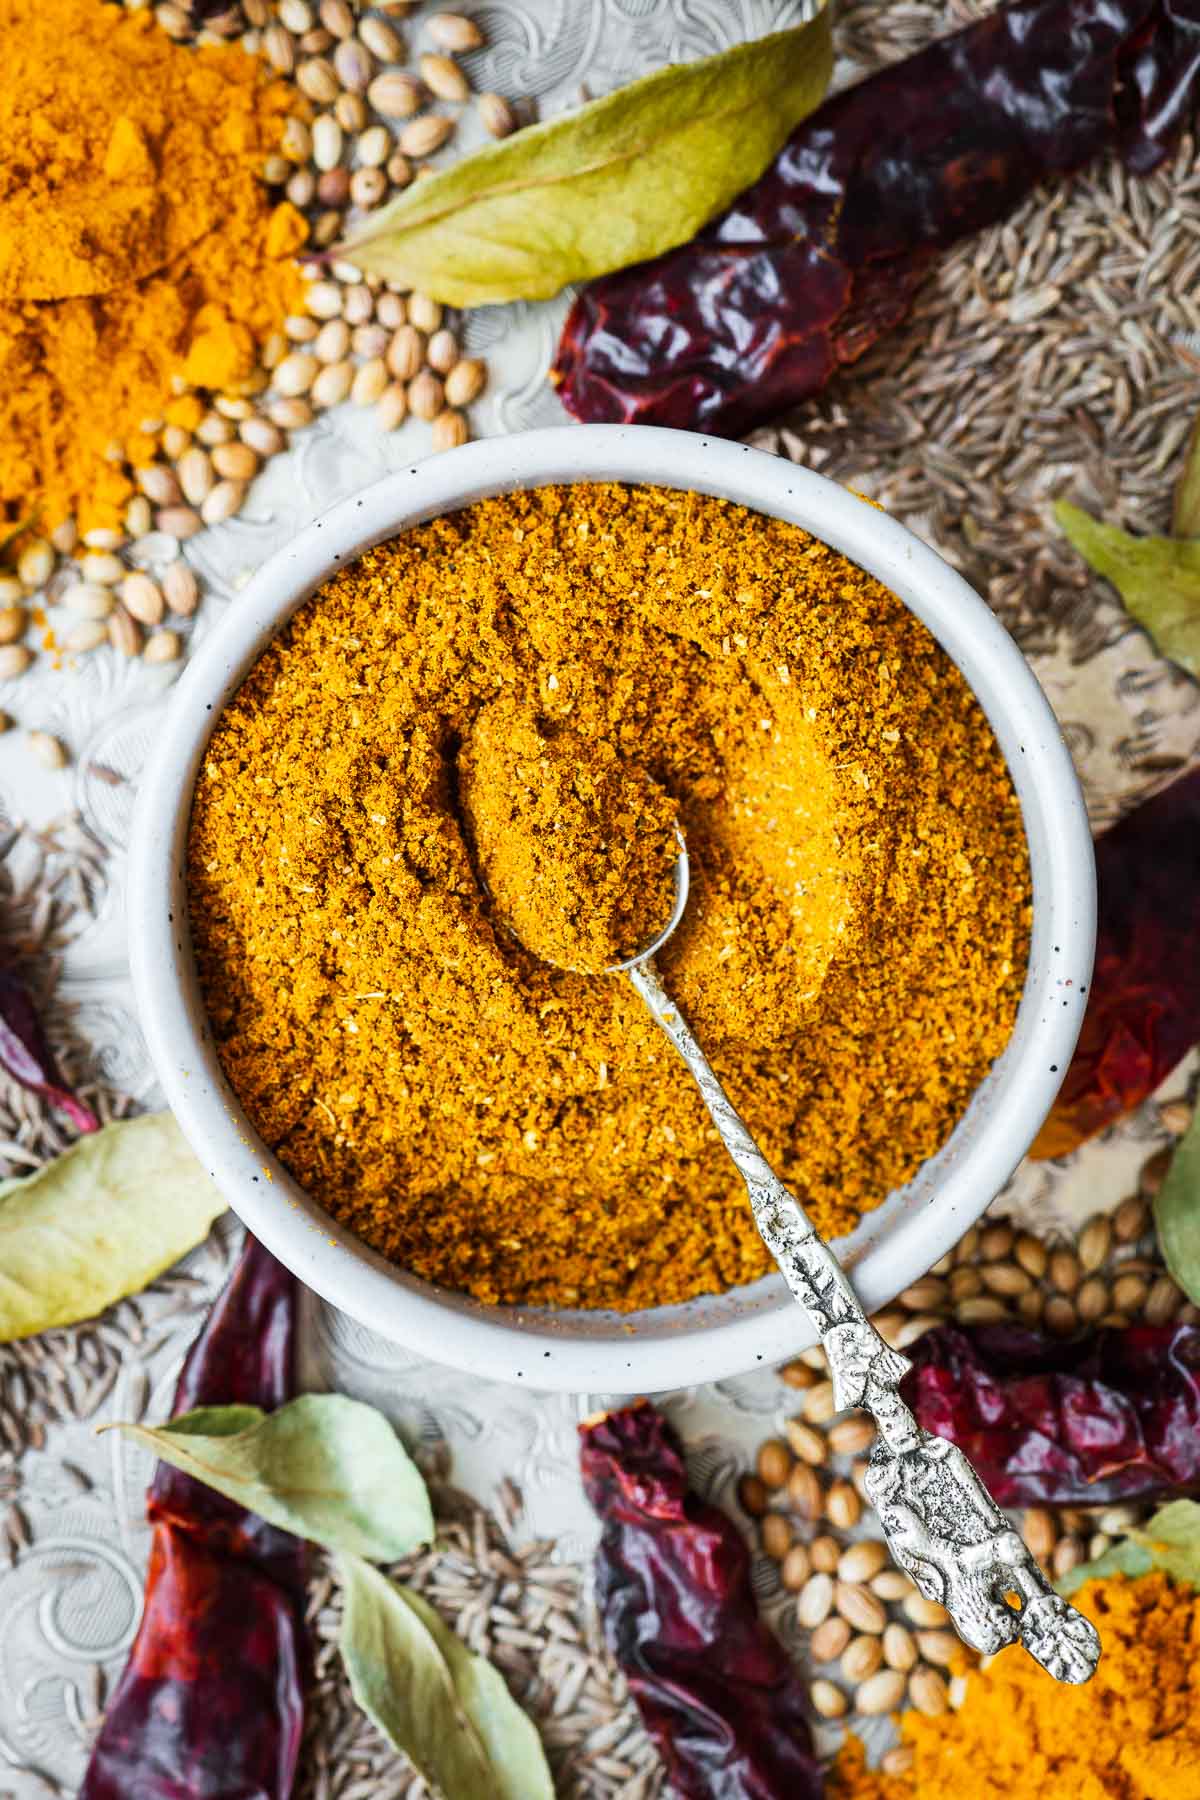 The 10 Best Curry Powder Substitutes (+ the Worst)